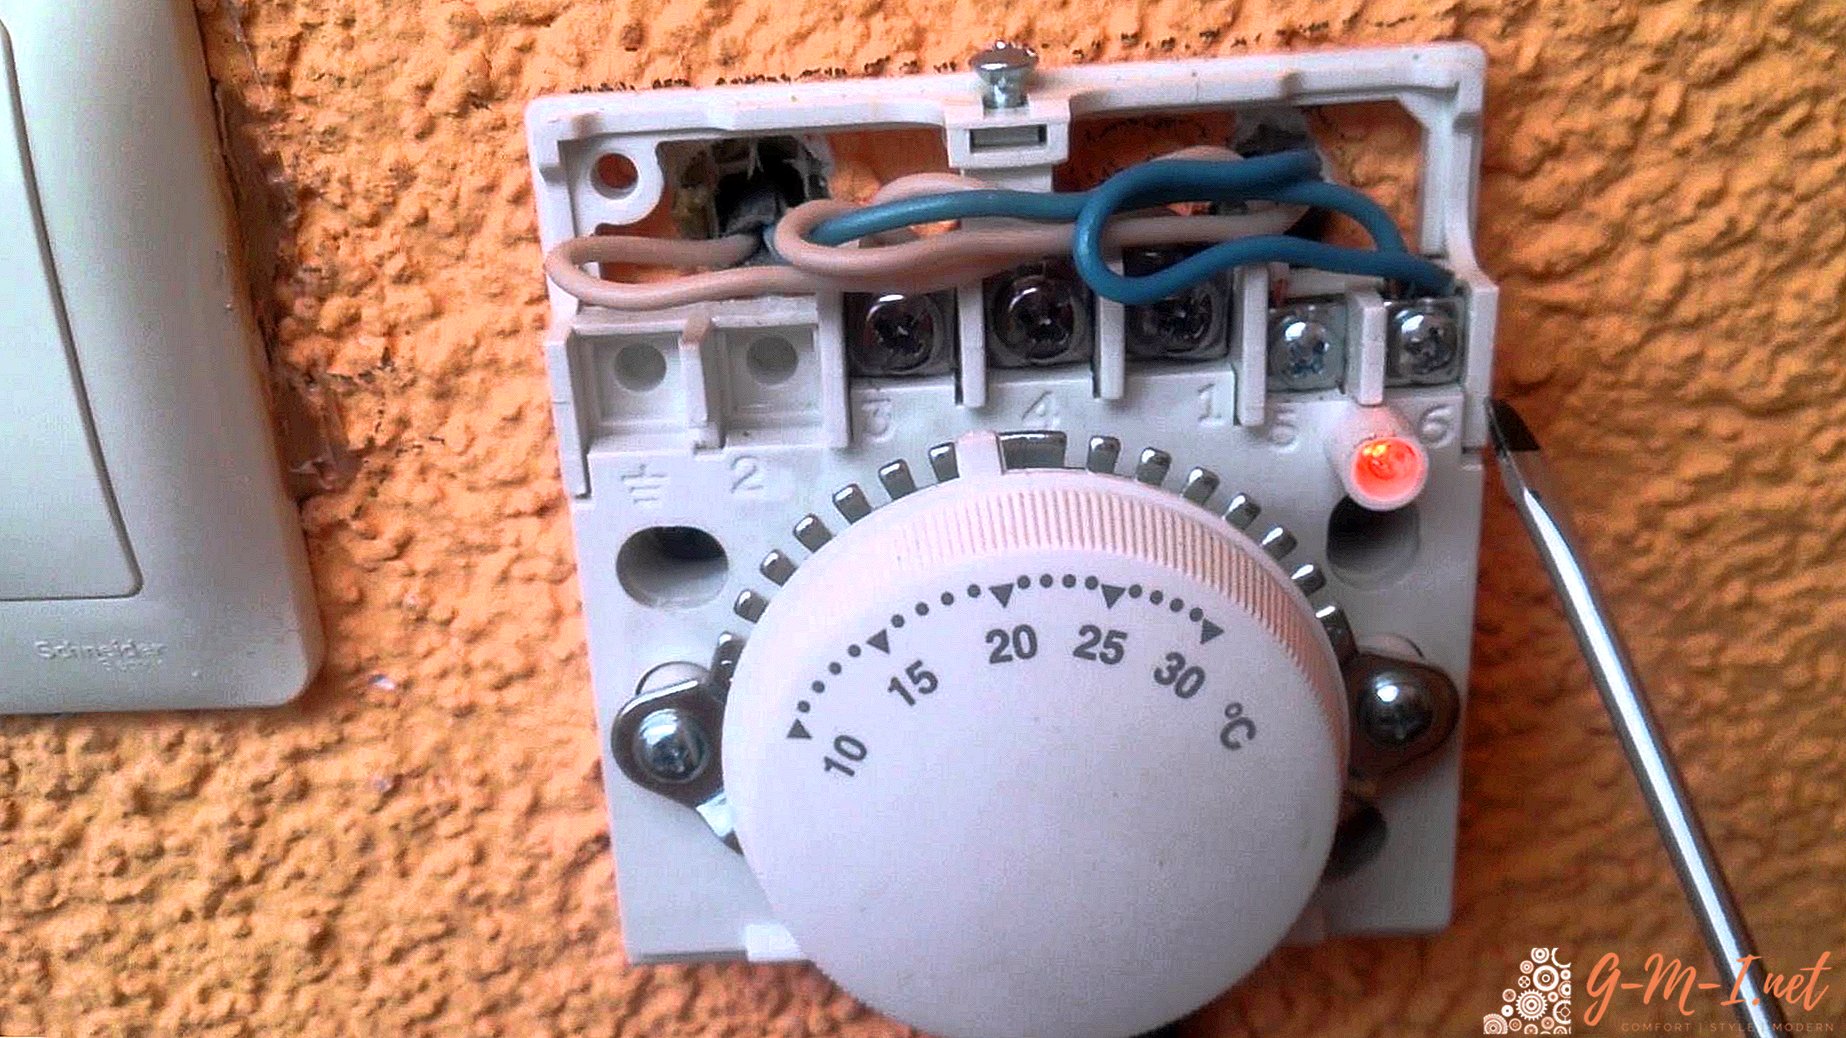 How to connect a temperature controller to an infrared heater